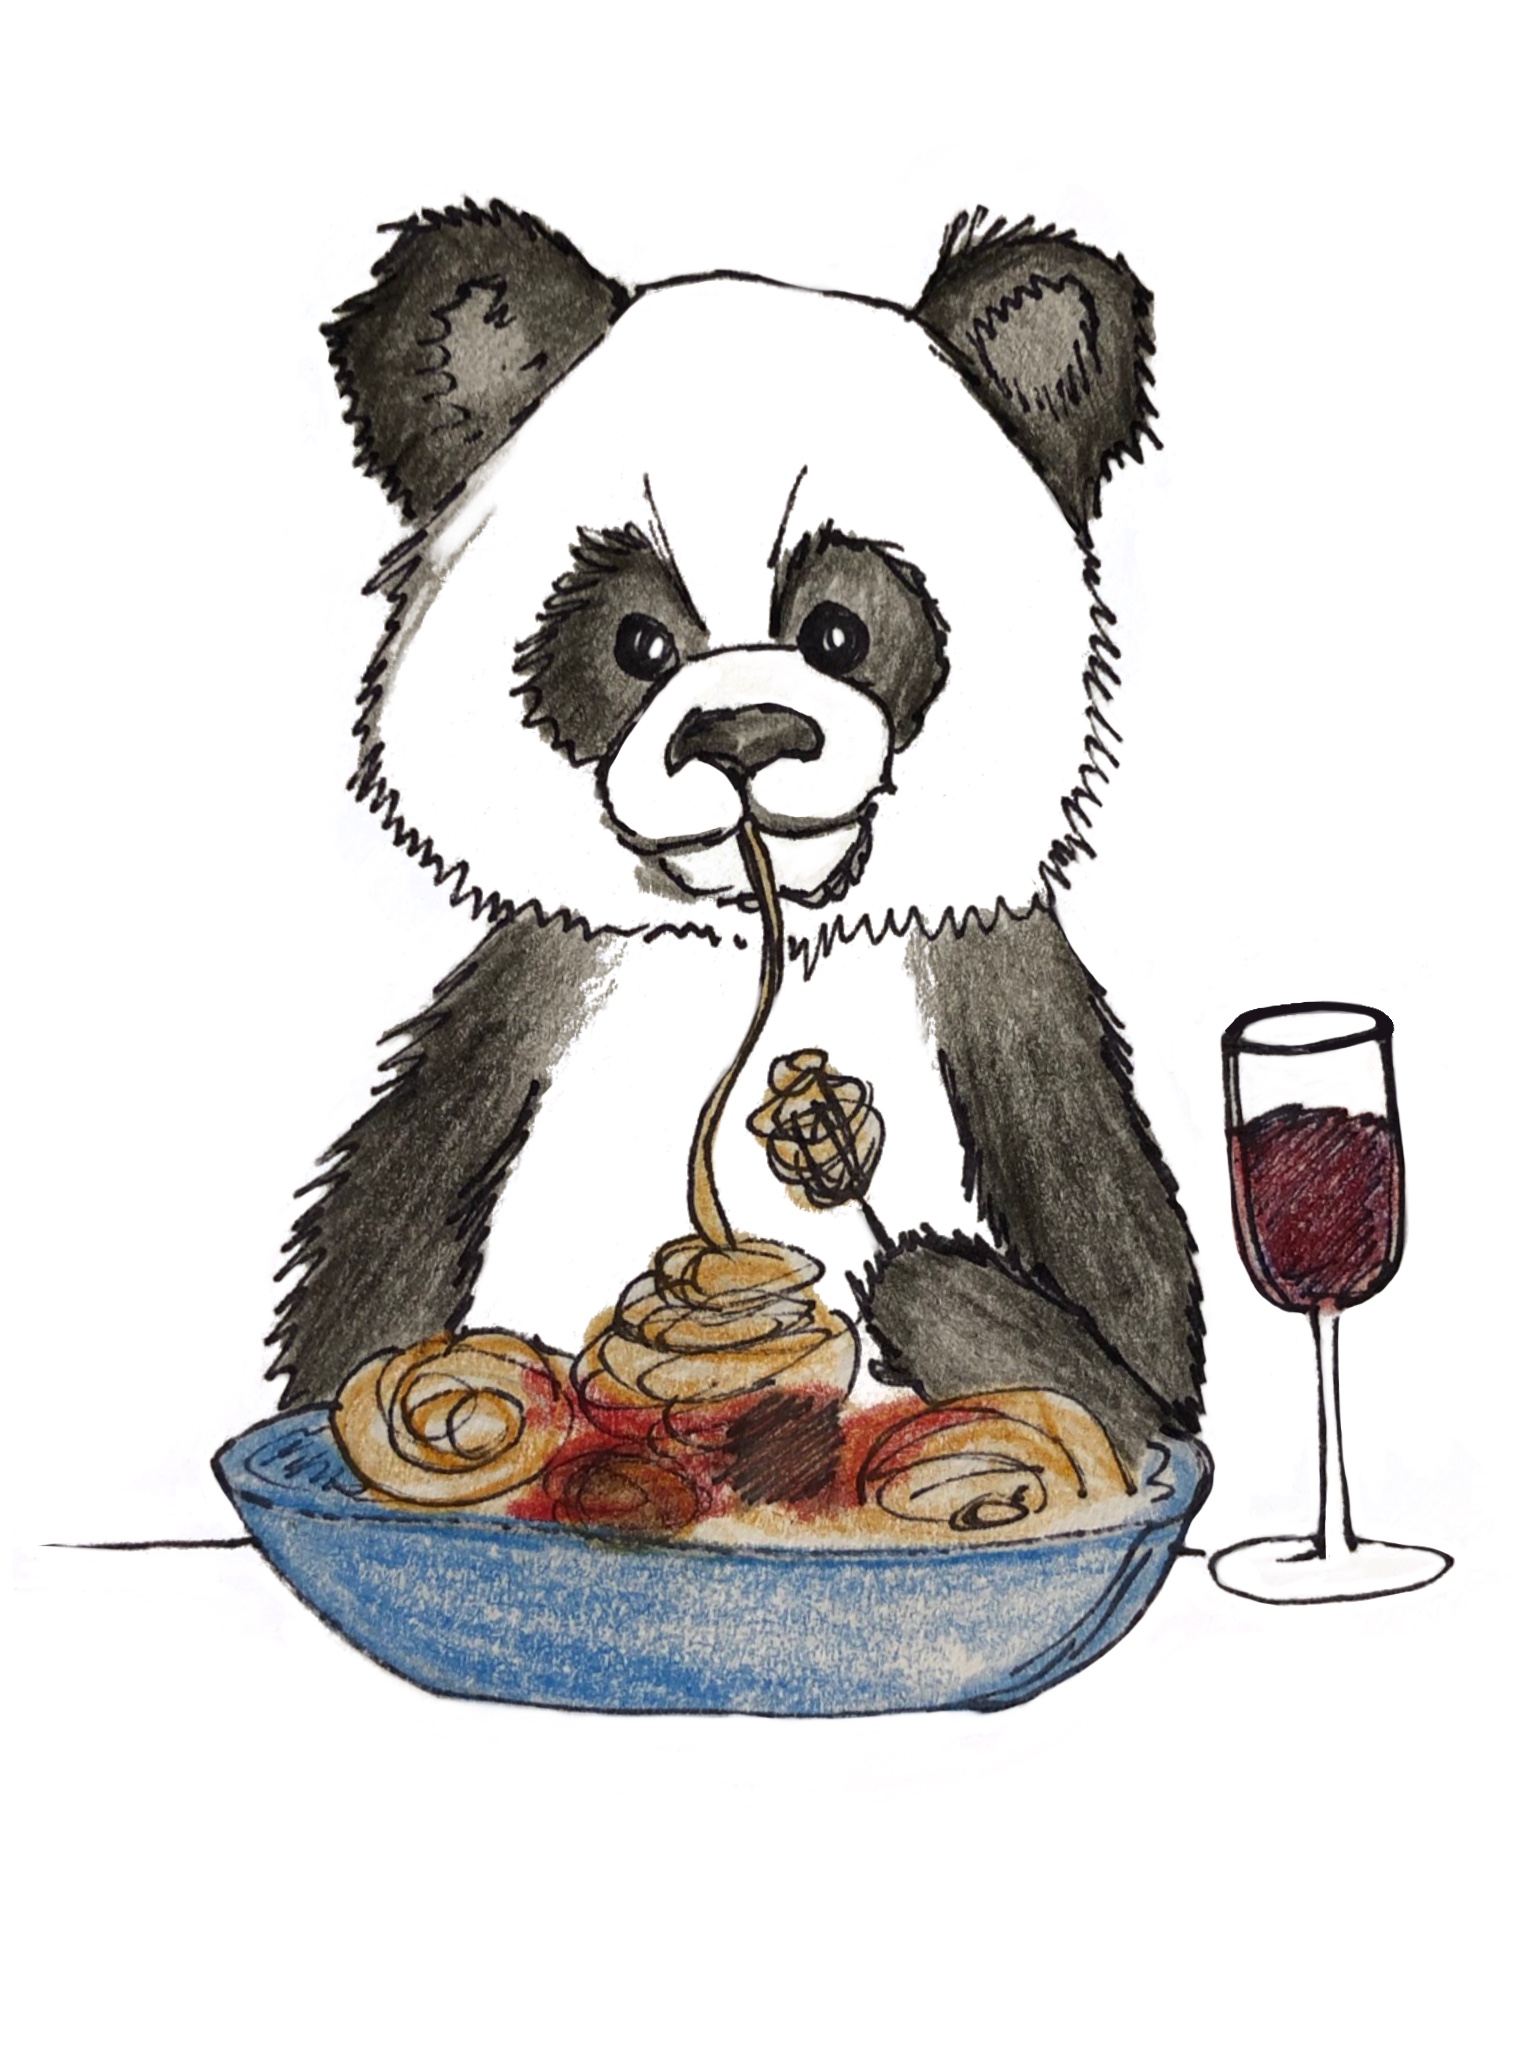 illustration depicting a panda slurping spaghetti from a plate of spaghetti and meatballs, sitting next to a glass of red wine 